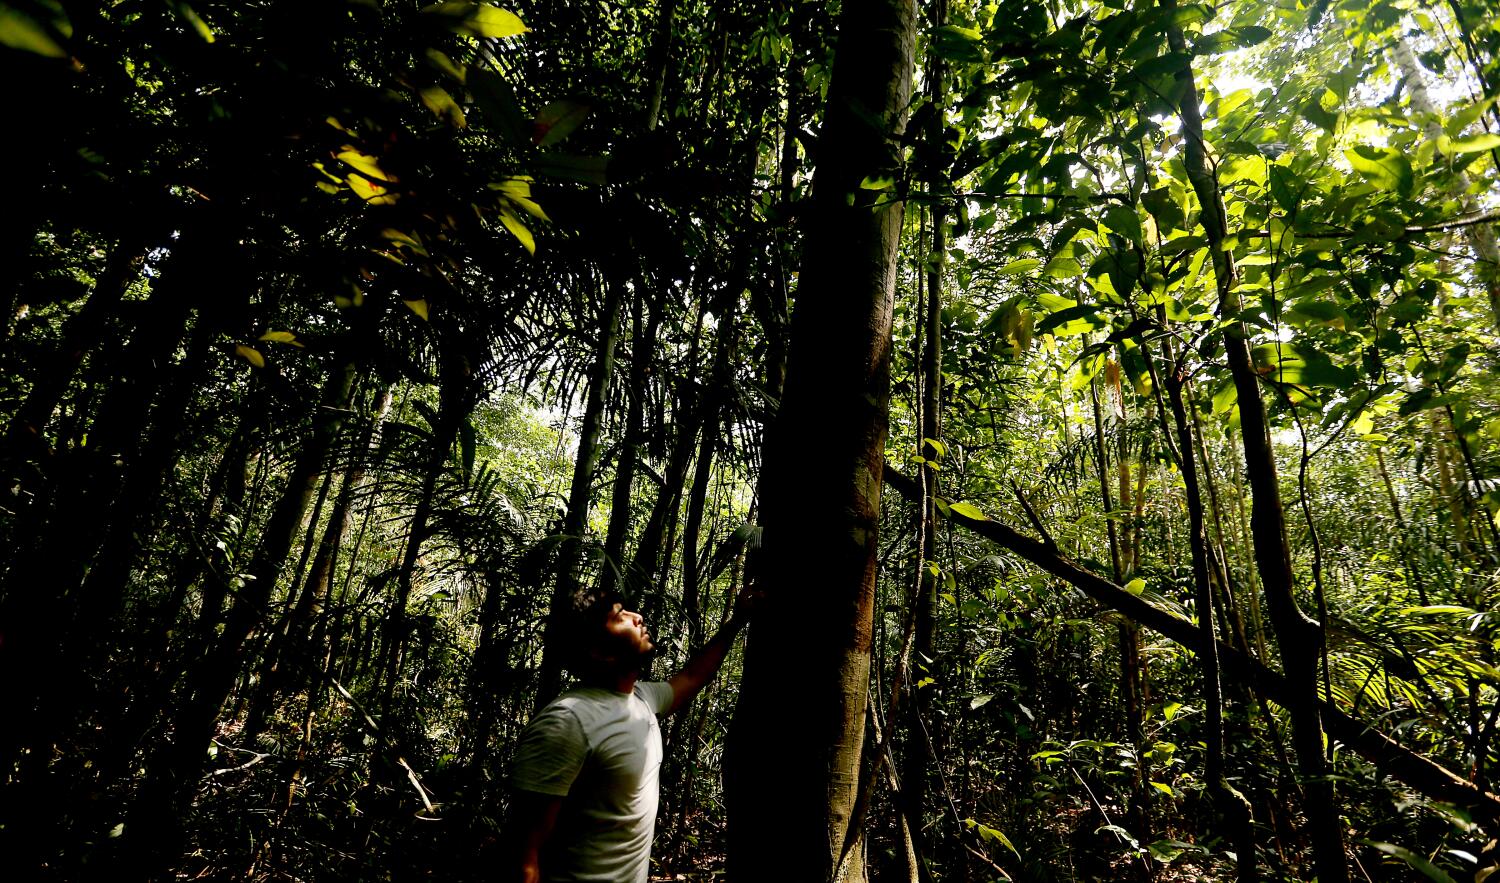 Tropical forests may be warming to a point where plant photosynthesis fails, study warns